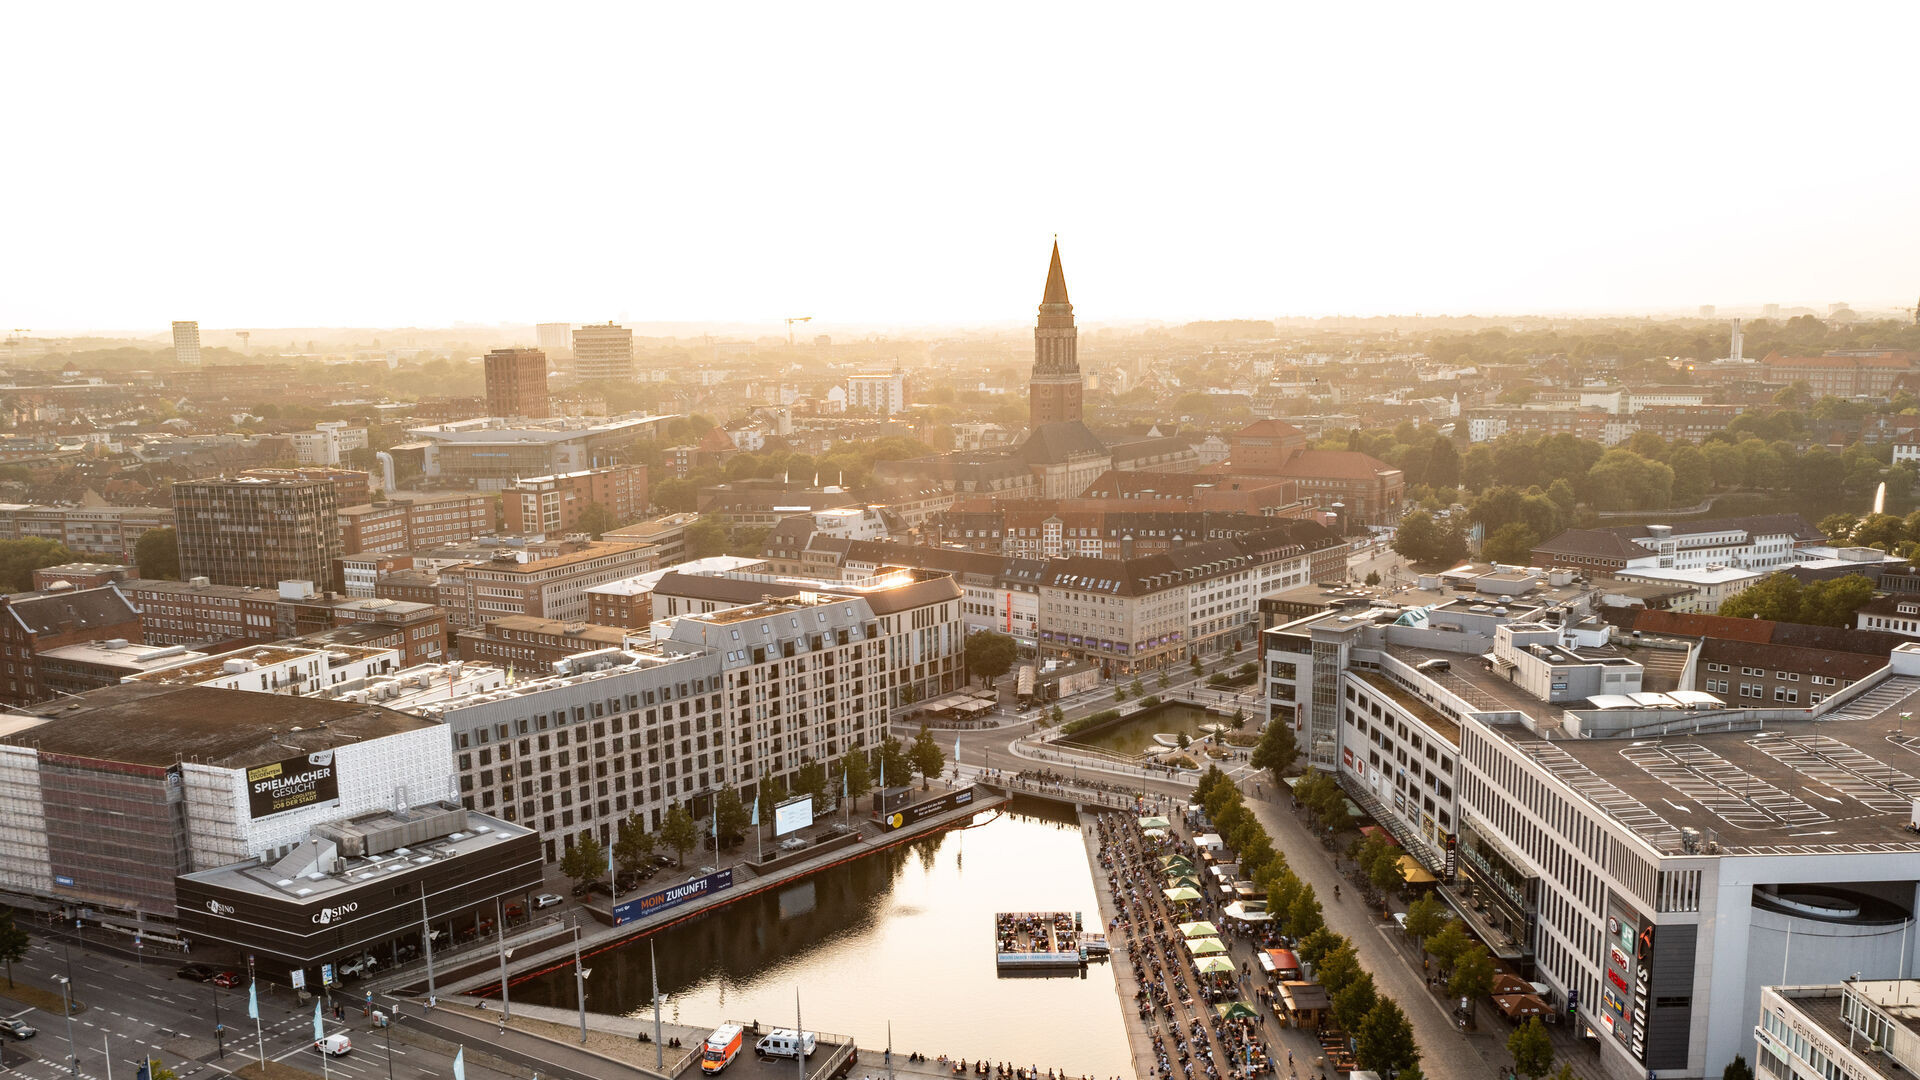  Big city flair and maritime lifestyle. What must you have seen and done in Kiel?